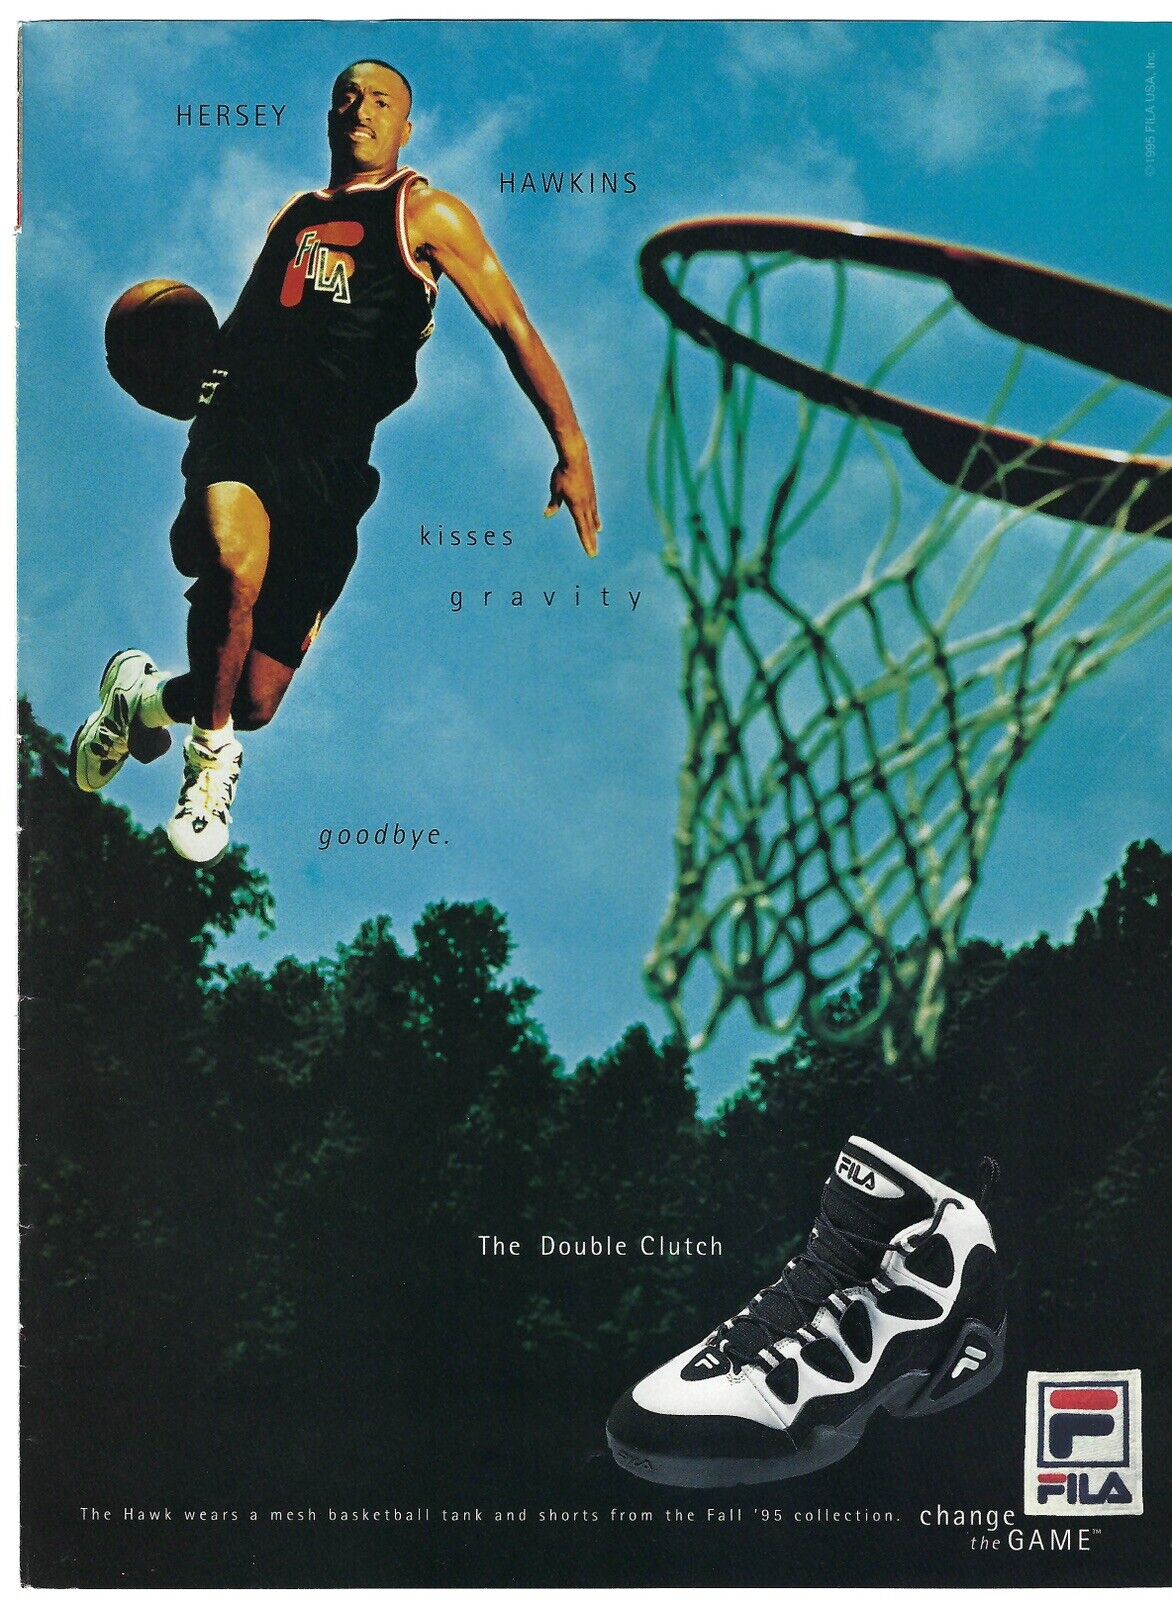 1995 FILA Basketball Shoes Hersey Hawkins Double Clutch Vintage Print Ad/Poster